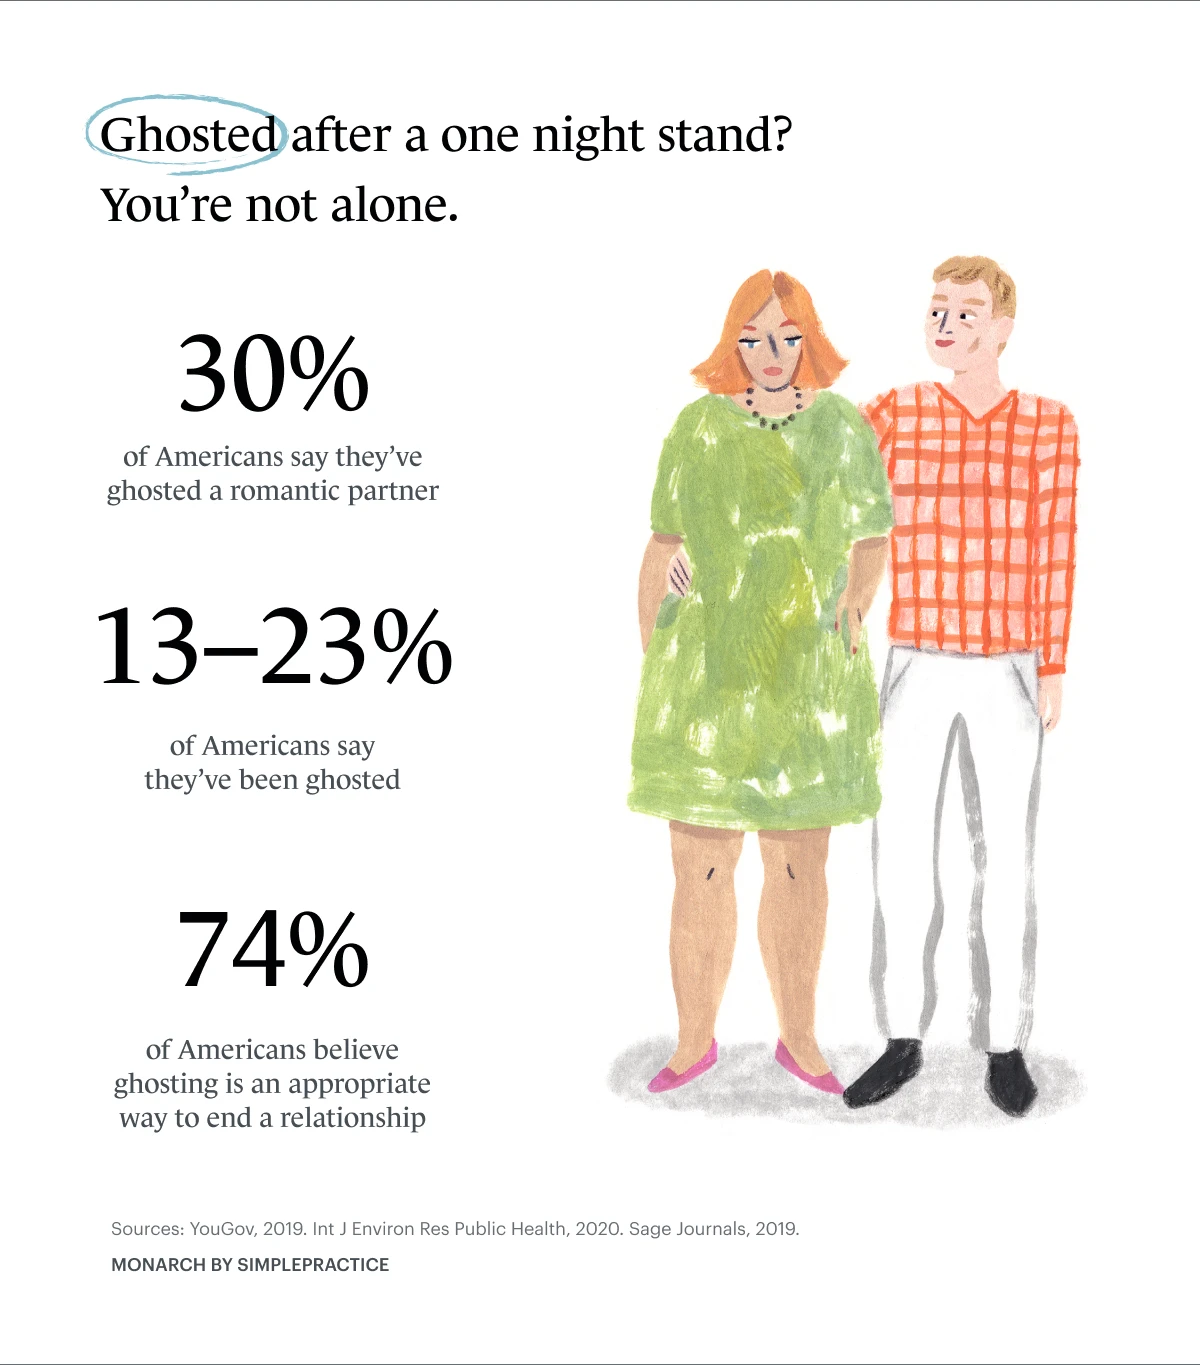 Monarch by SimplePractice infographic stating that 30% of Americans have ghosted someone, 13–23% of U.S. adults have been ghosted, and 74% of Americans believe ghosting is an appropriate way to end a relationship.